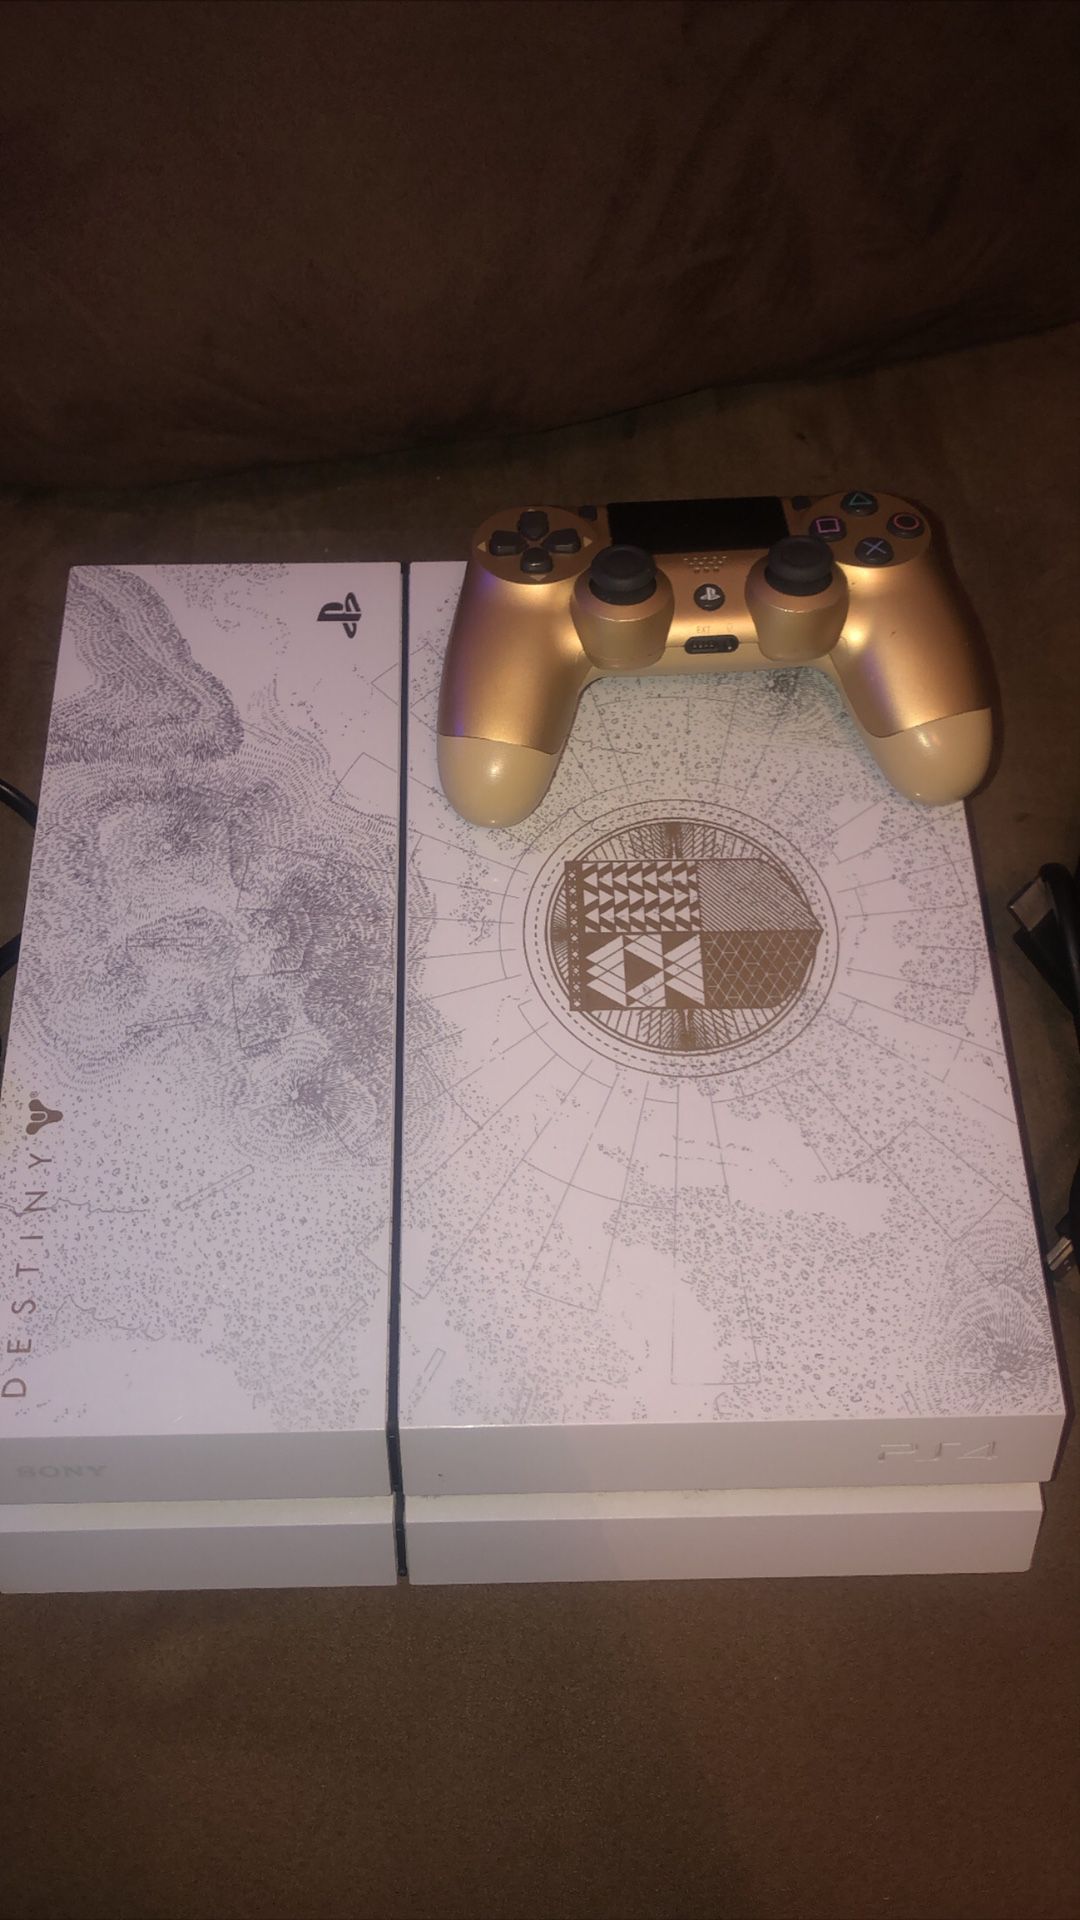 Limited addition ps4!!! Good condition comes with gold controller.